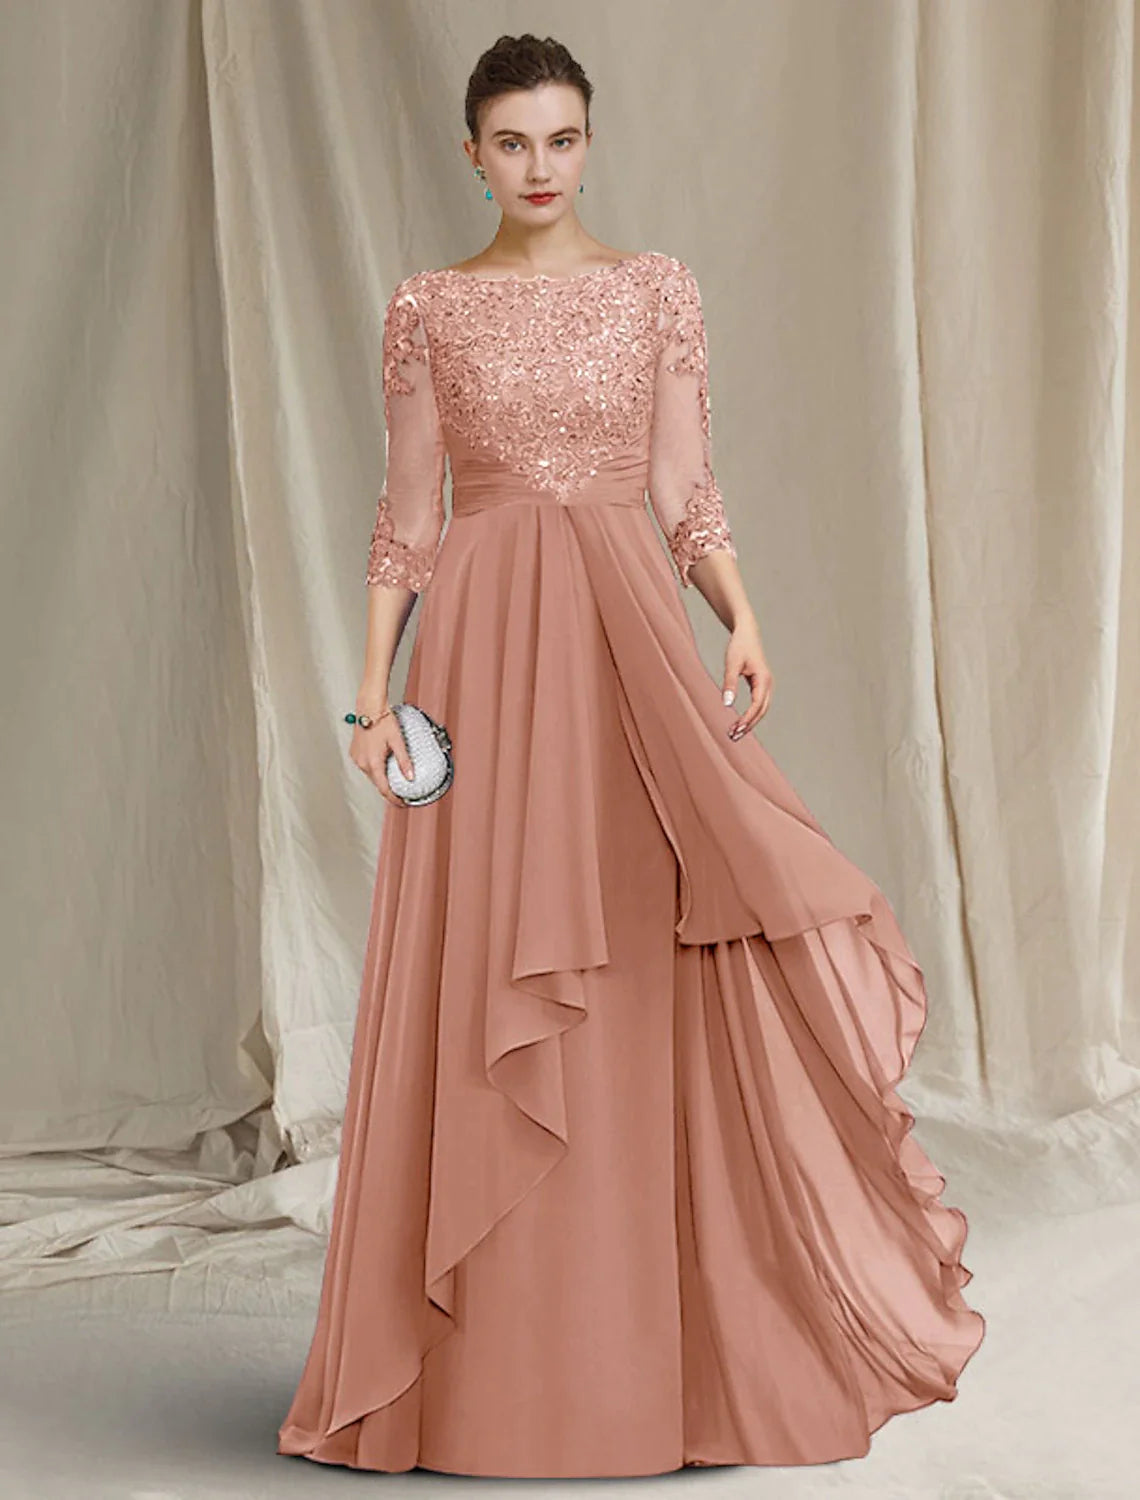 A-Line Mother of the Bride Dress Luxurious Elegant Jewel Neck Floor Length Chiffon Lace Sequined 3/4 Length Sleeve with Pleats Beading Appliques